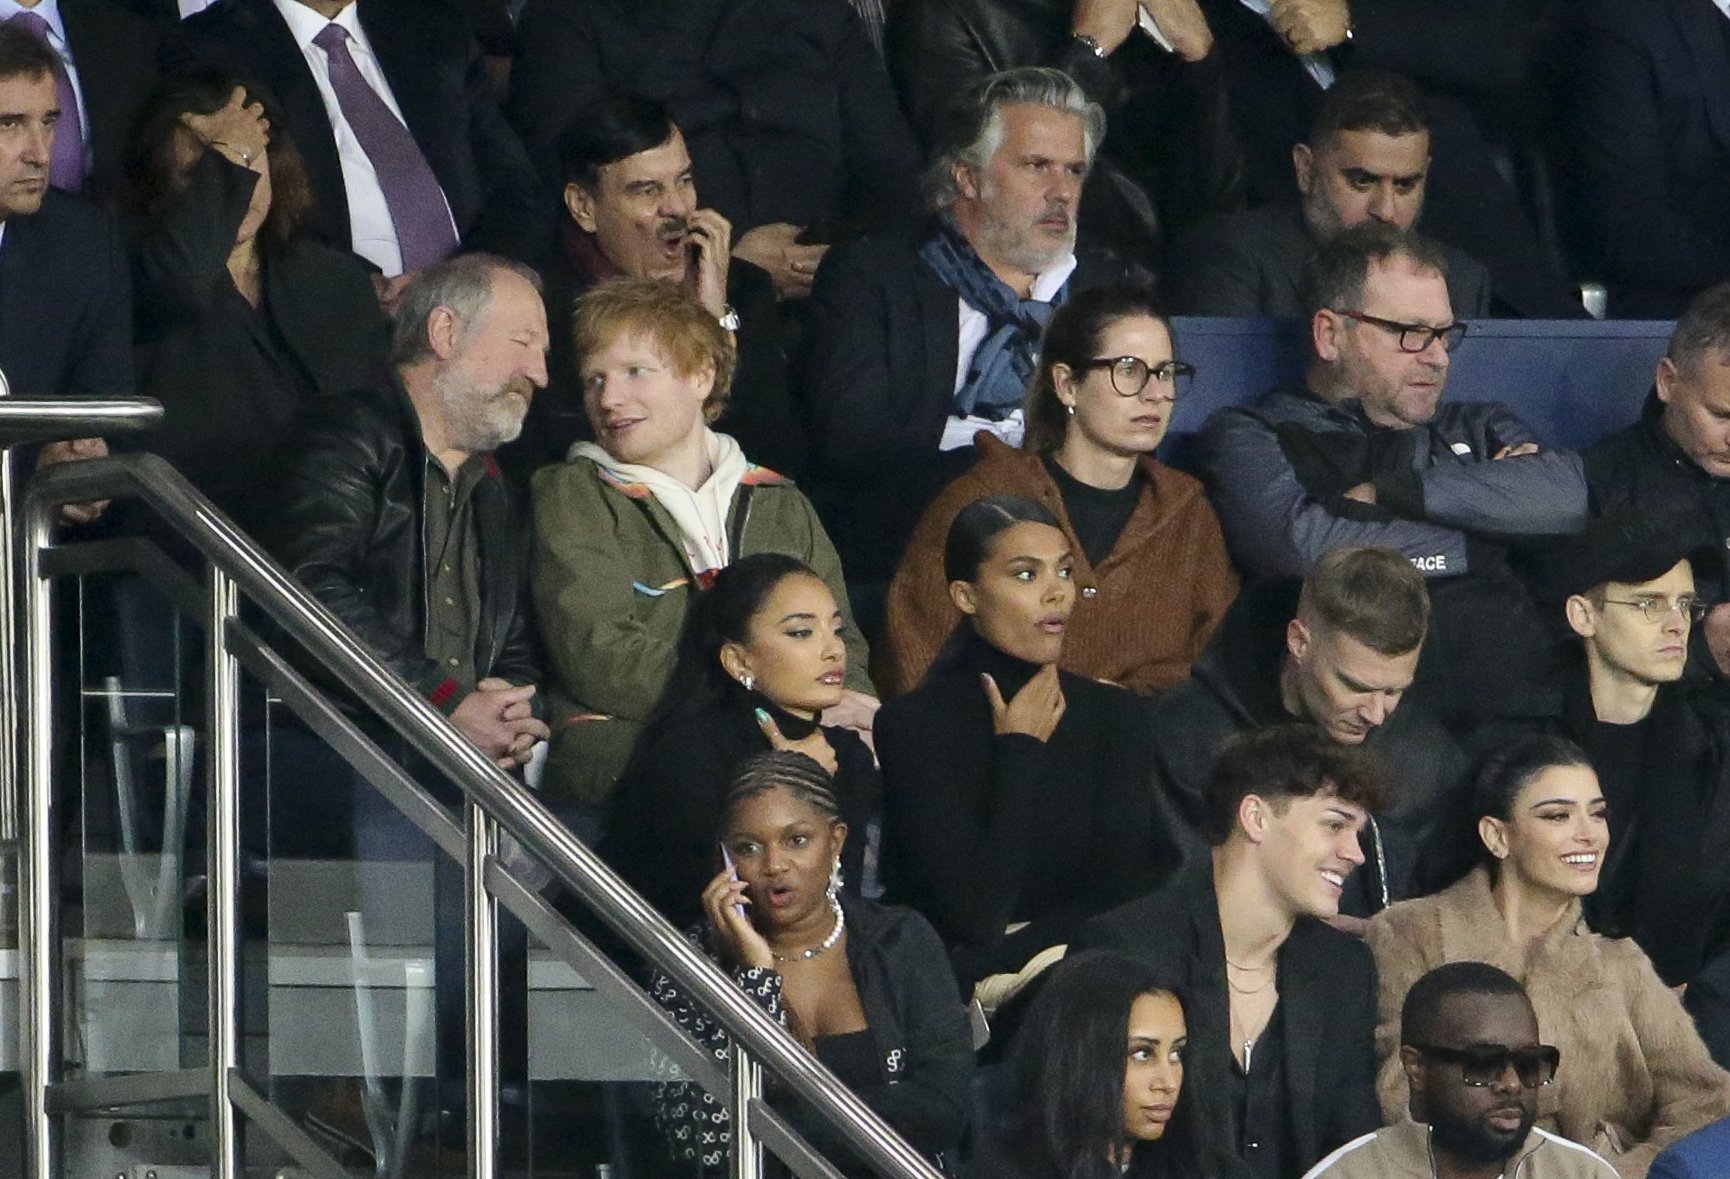 John Sheeran, Ed Sheeran, and Cherry Seaborn, at a UEFA Champions League match between Paris Saint-Germain and Manchester City, at Parc des Princes stadium, in Paris, France, on September 28, 2021. | Source: Getty Images